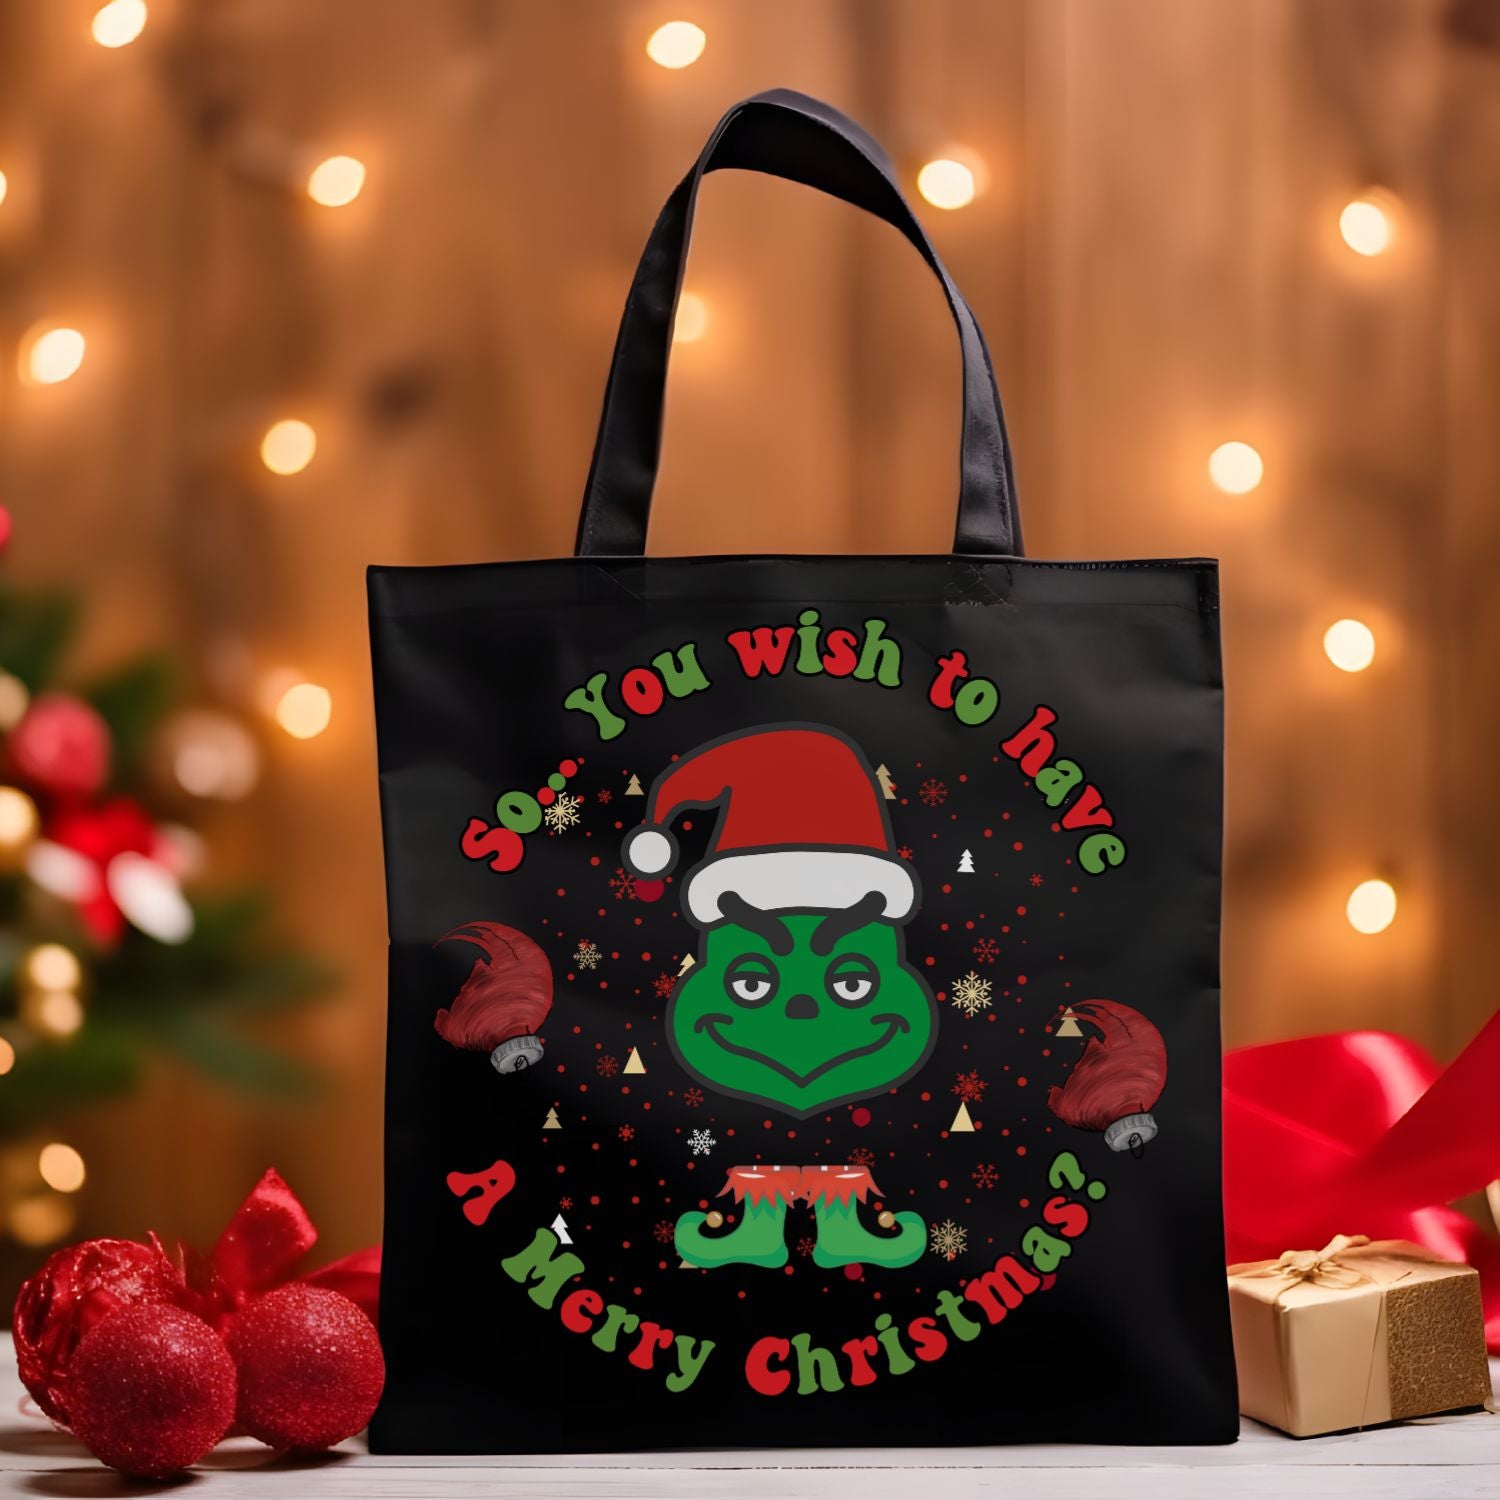 Christmas Tote Bag | Grinchmas Family Gift | Holiday Tote for Festive Fashion Accessories   